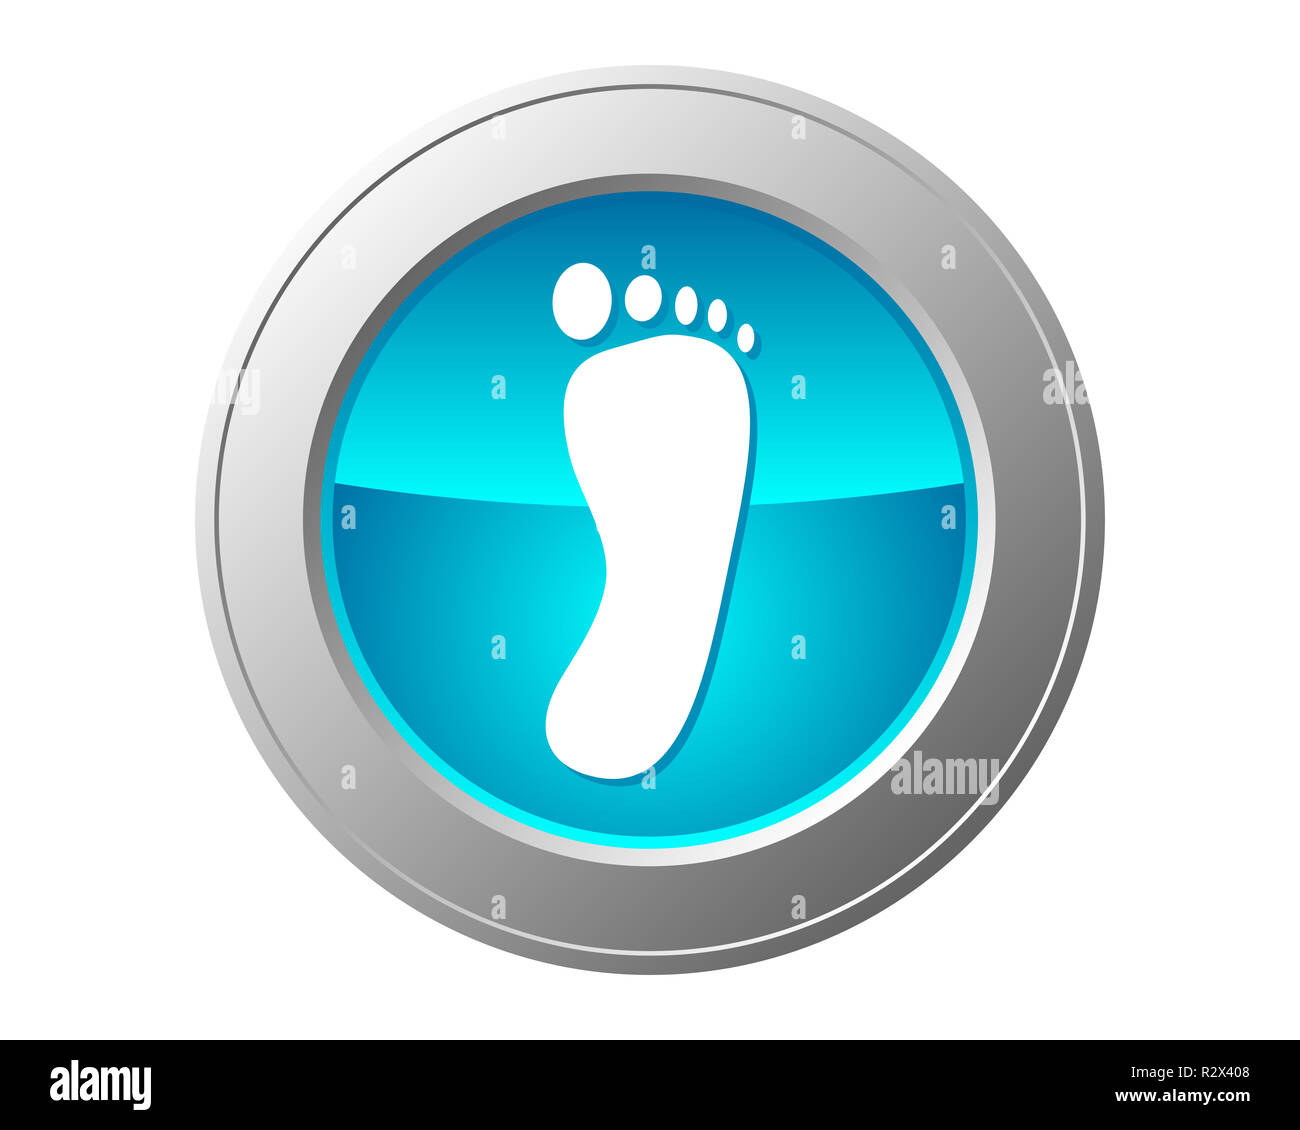 foot button Stock Photo